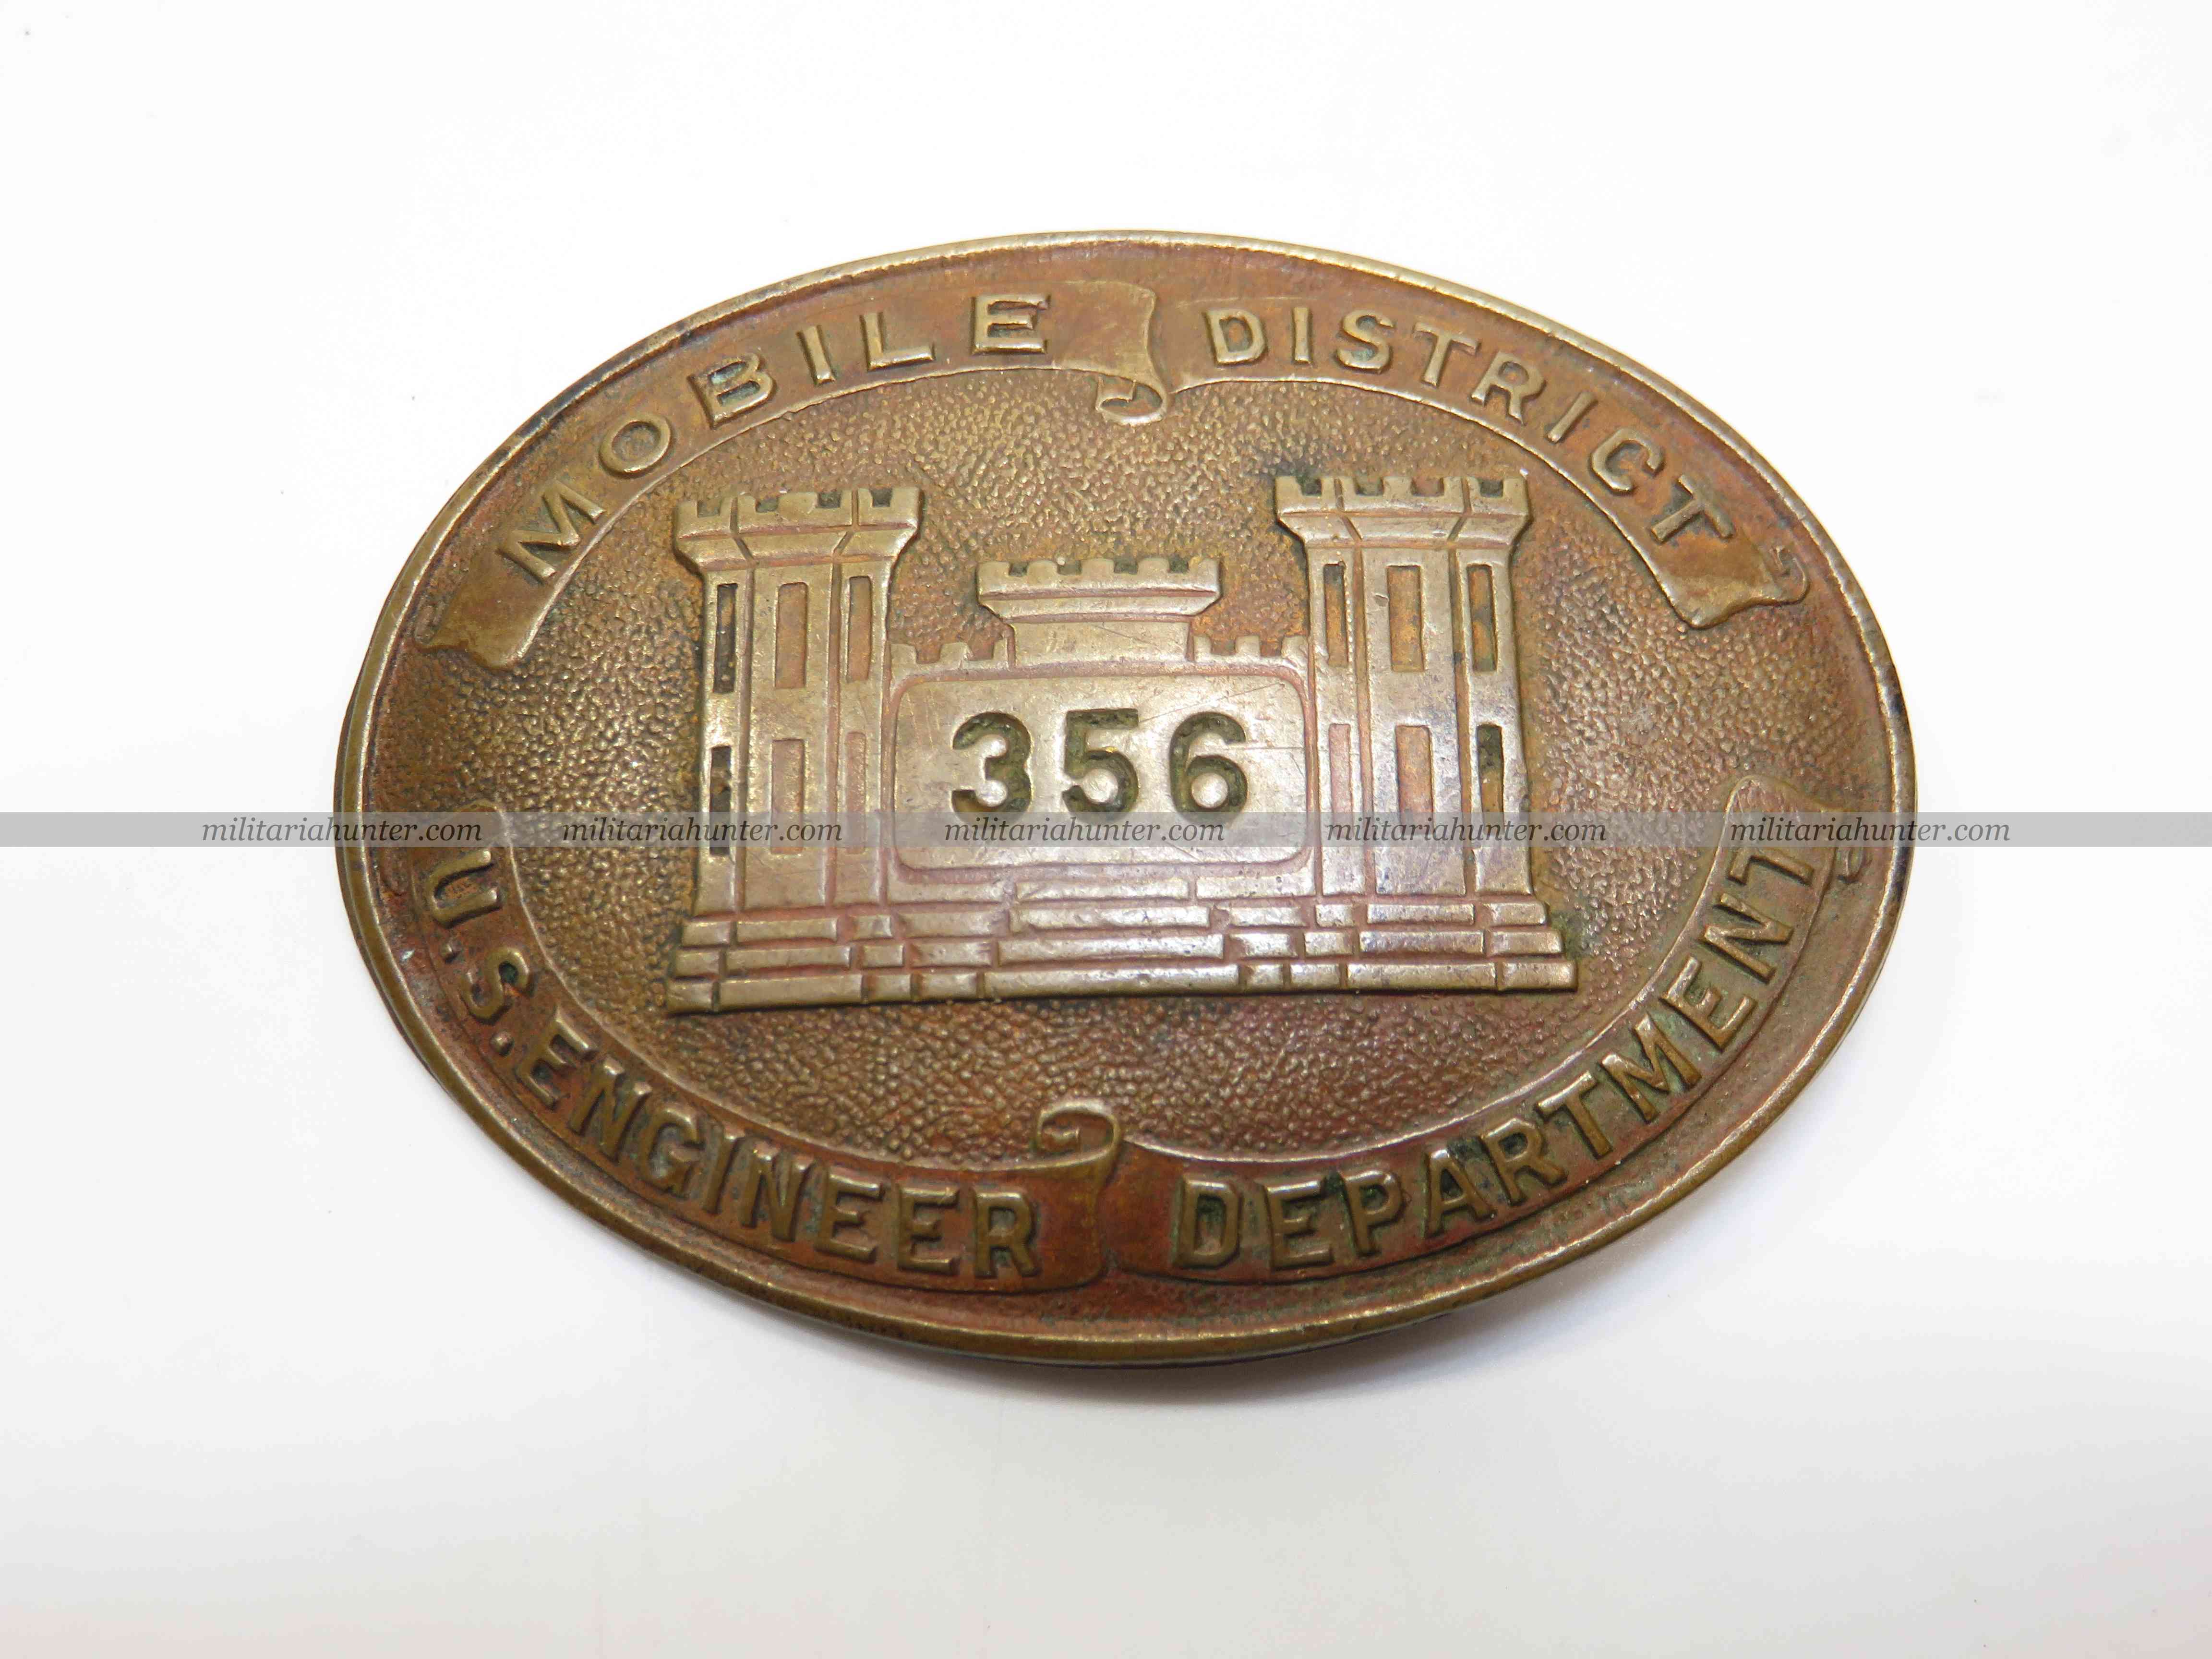 militaria : US ww1 US army engineers mobile district badge